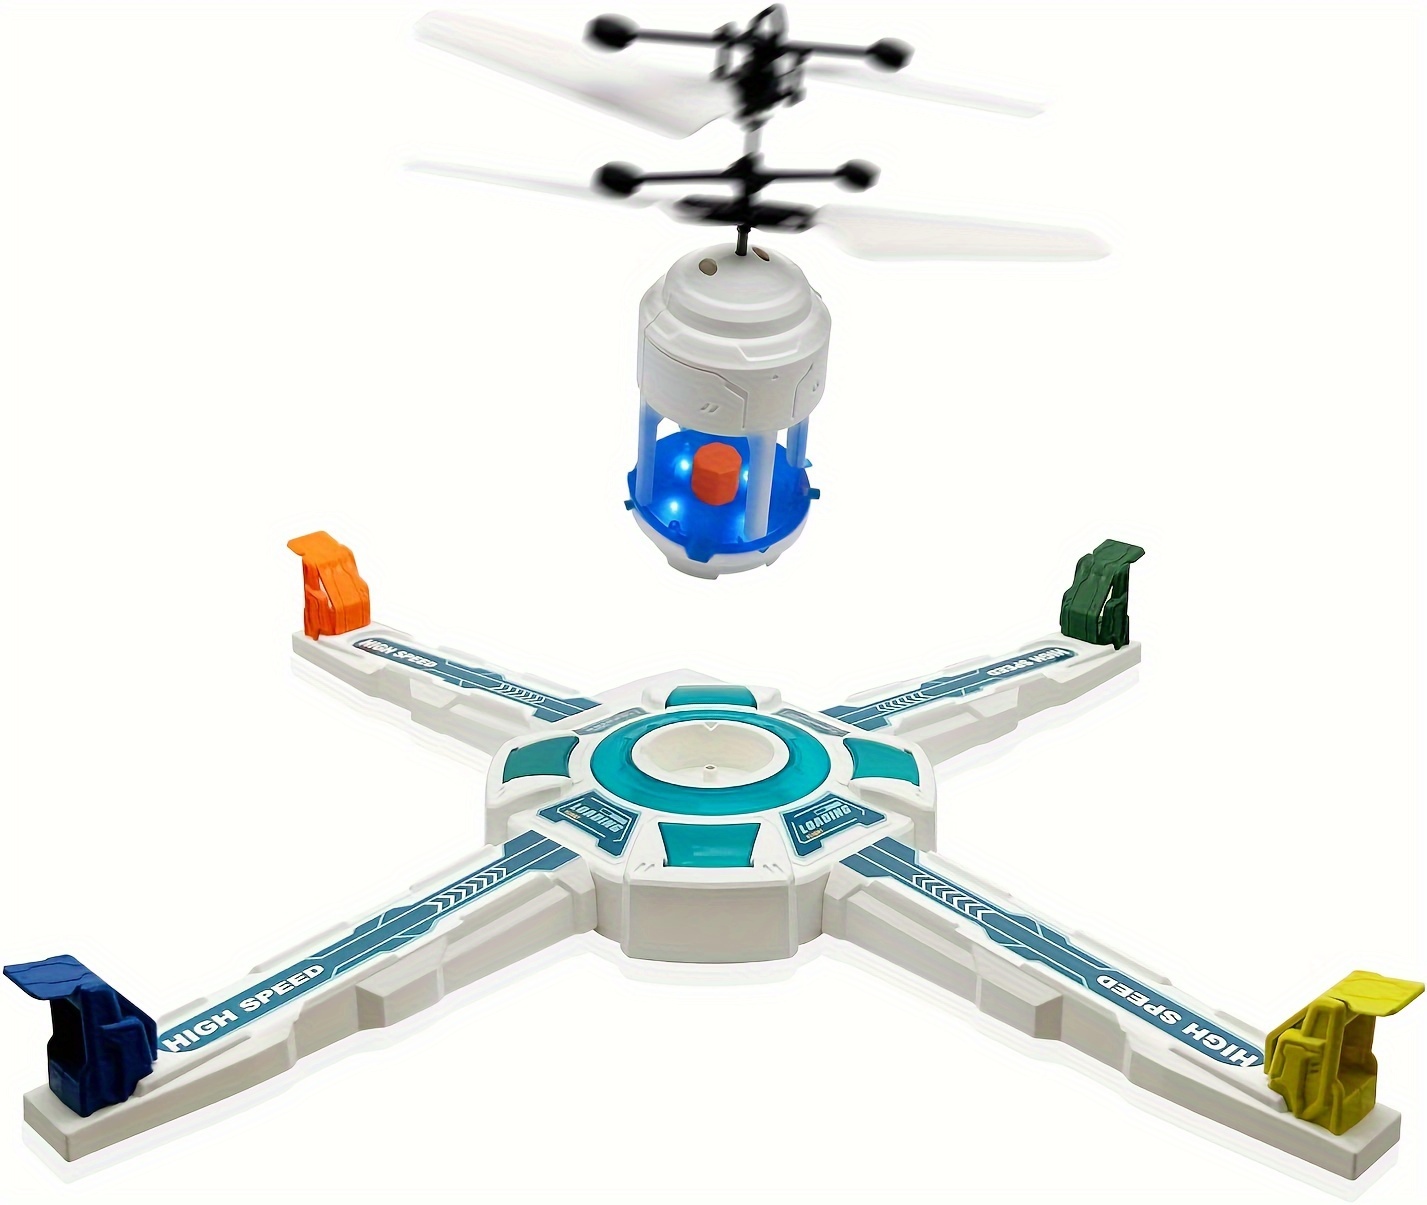 Toys Magic Flying Drone Toy With Lights, Mini UFO Toy Suitable For Multiplayer Competition Indoor Outdoor Christmas Birthday Catapult Drone details 2